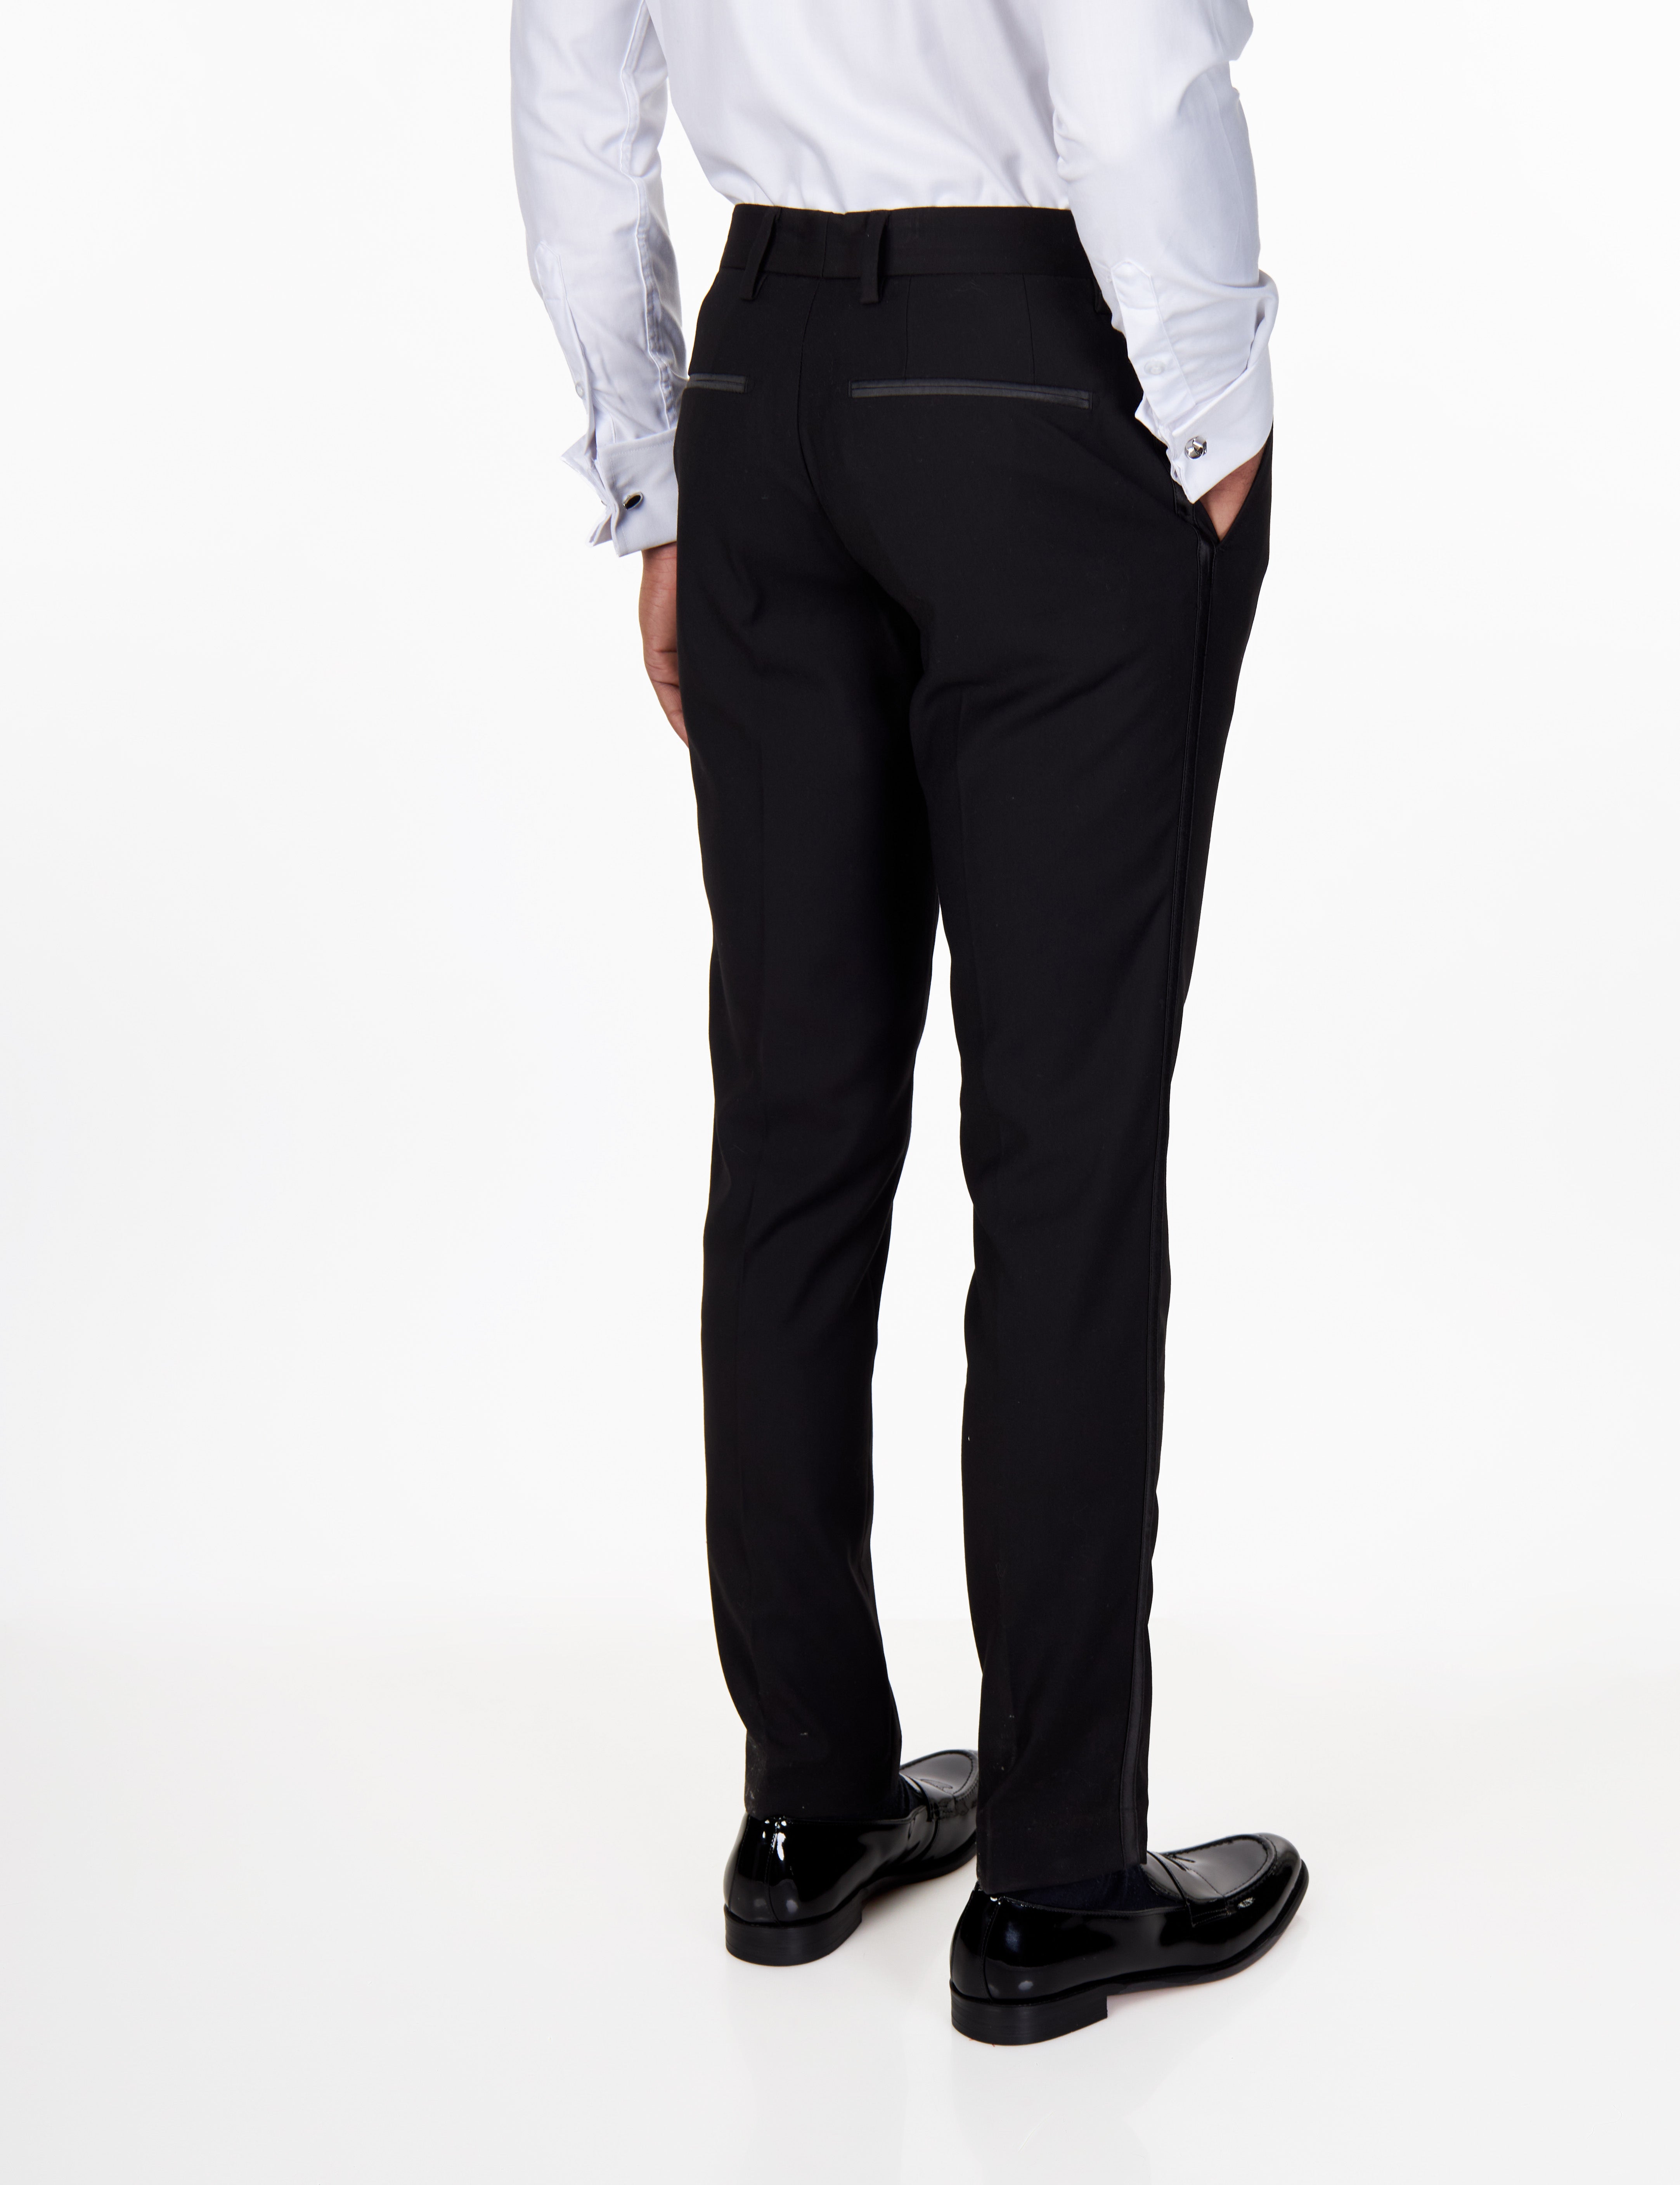 BLACK TUXEDO TROUSERS WITH SATIN TAPE FOR PARTY & WEDDING – XPOSED